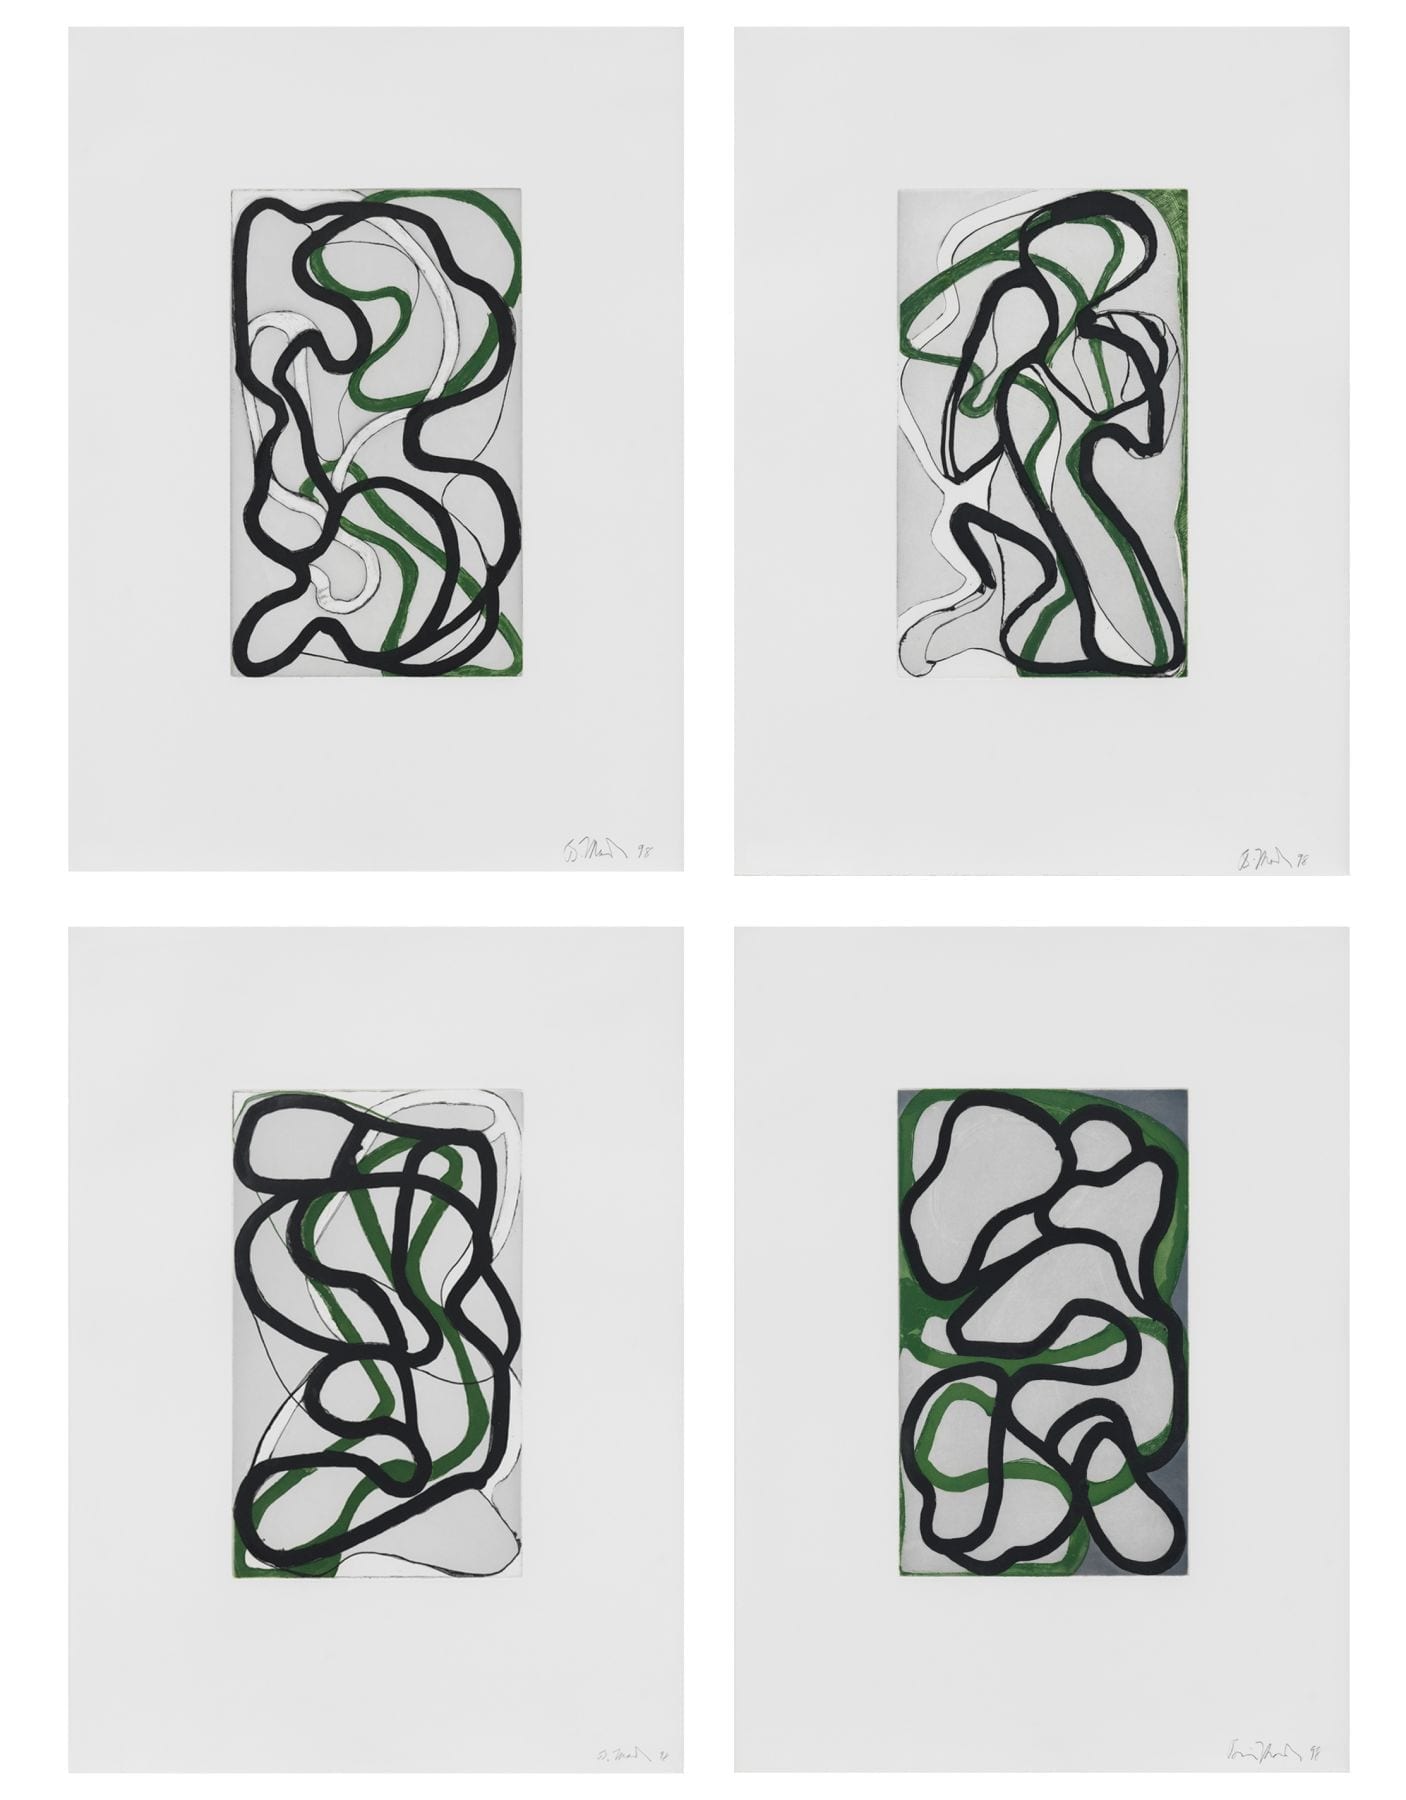 Brice Marden, Suzhou I-IV, 1998, The complete set of four etchings with aquatint, drypoint, and scraping in colors